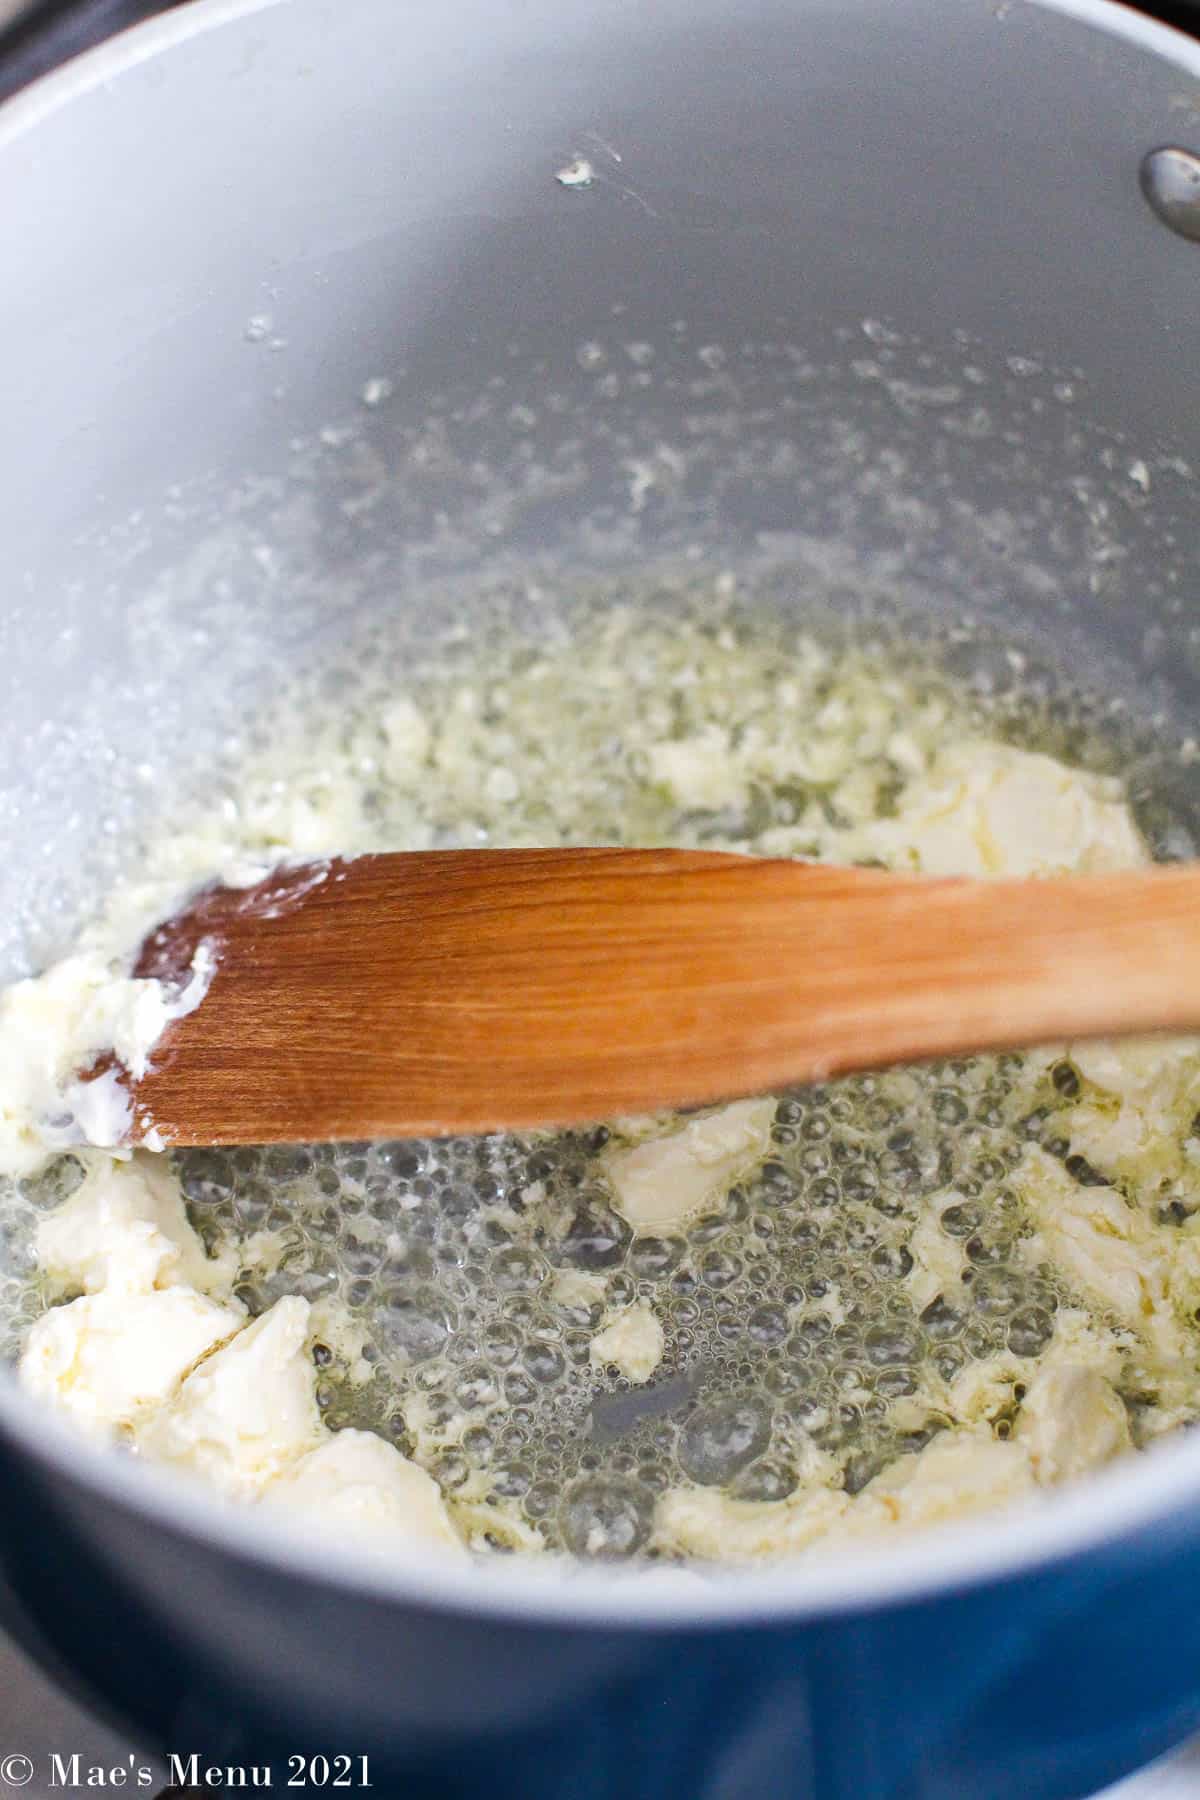 melting the butter and cream cheese in a saucepan